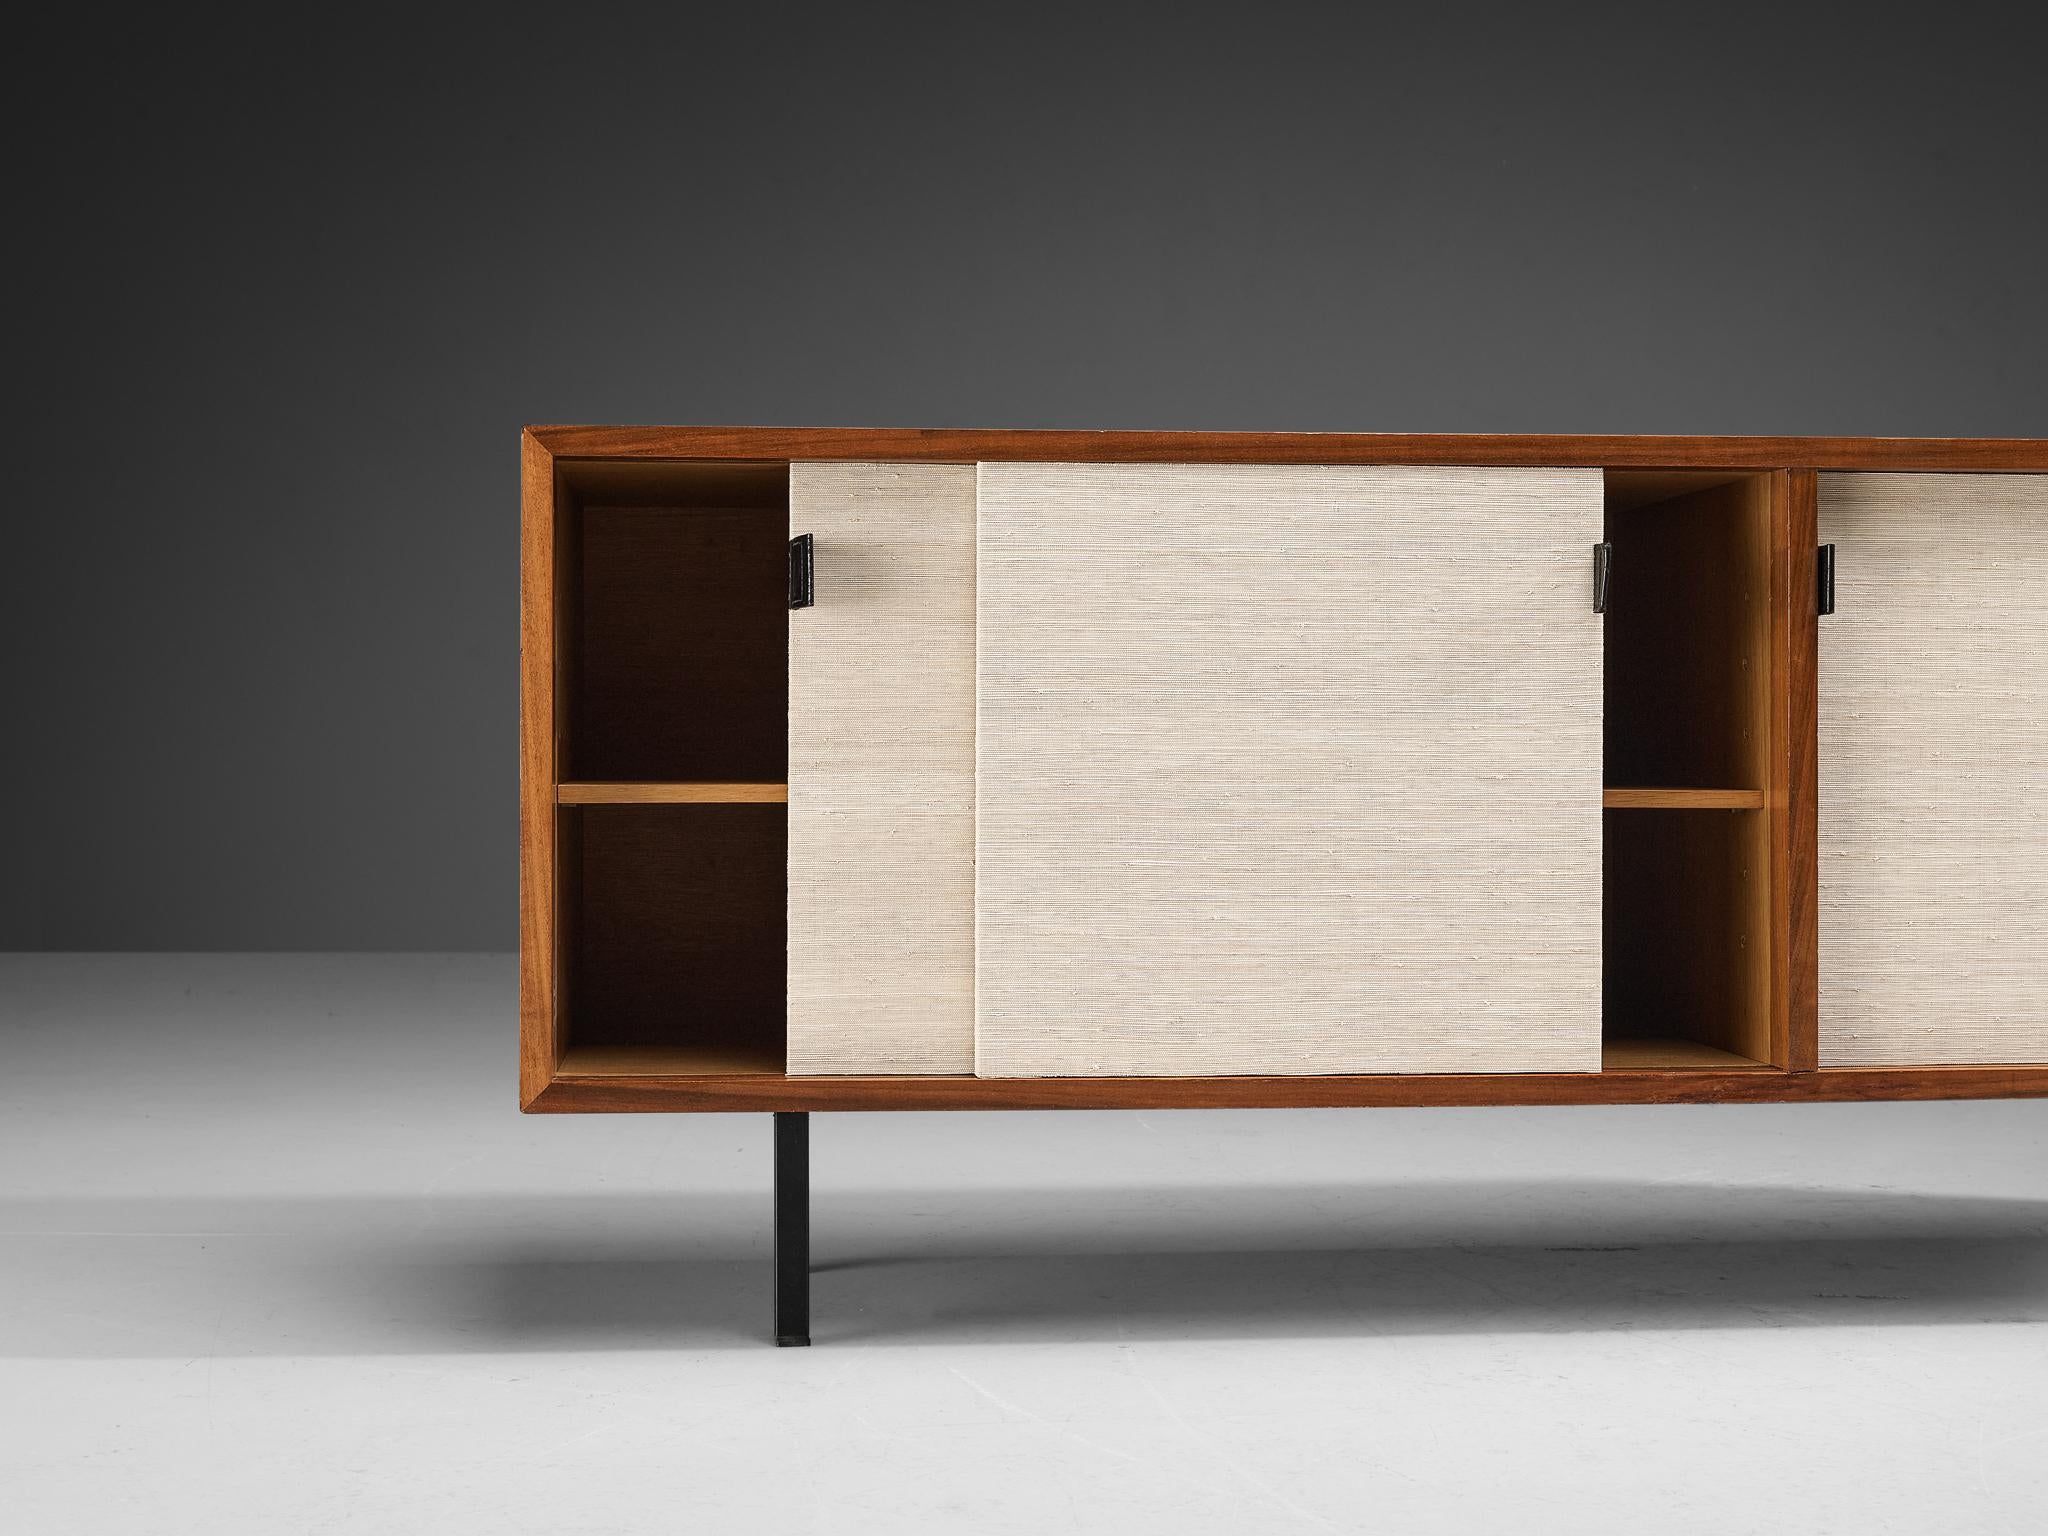 Florence Knoll for Knoll, sideboard, teak, fabric, metal, United States, ca. 1950

This sideboard is designed by Florence Knoll for Knoll International. The sideboard is executed in teak wood, with four sliding doors, leather handles, and metal